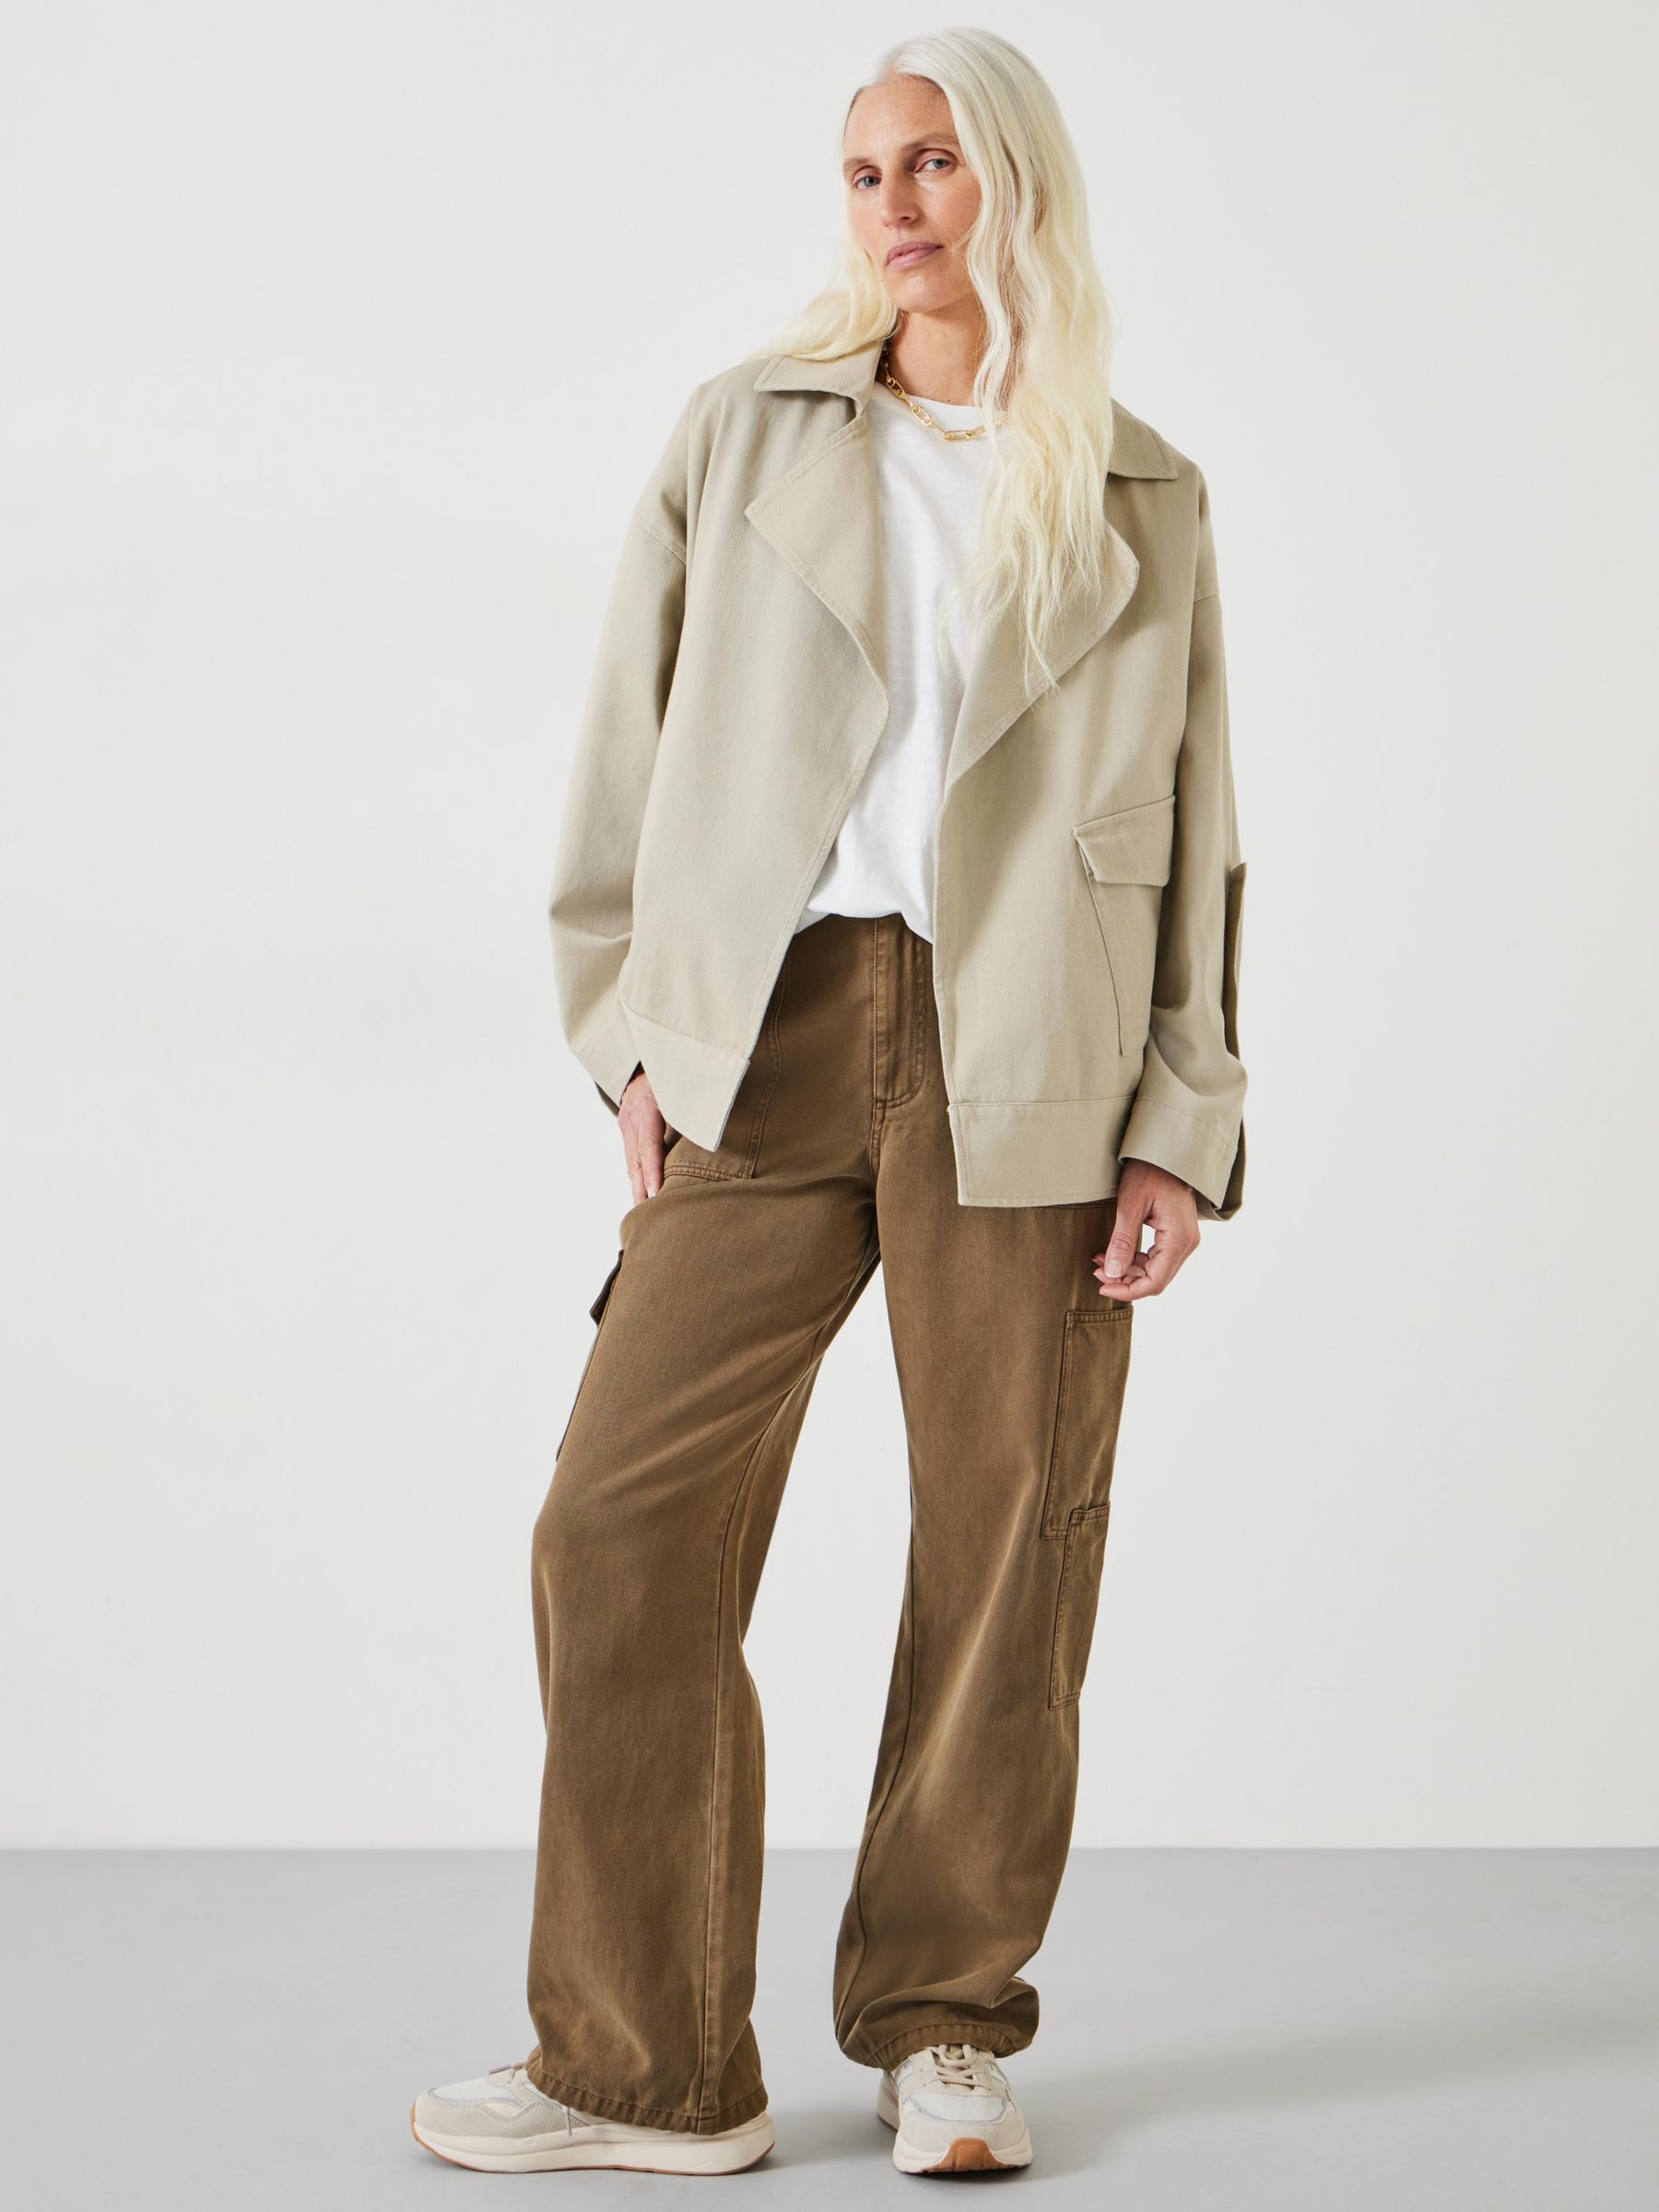 Buy HUSH Renee Relaxed Cotton Jacket, Sand Online at johnlewis.com